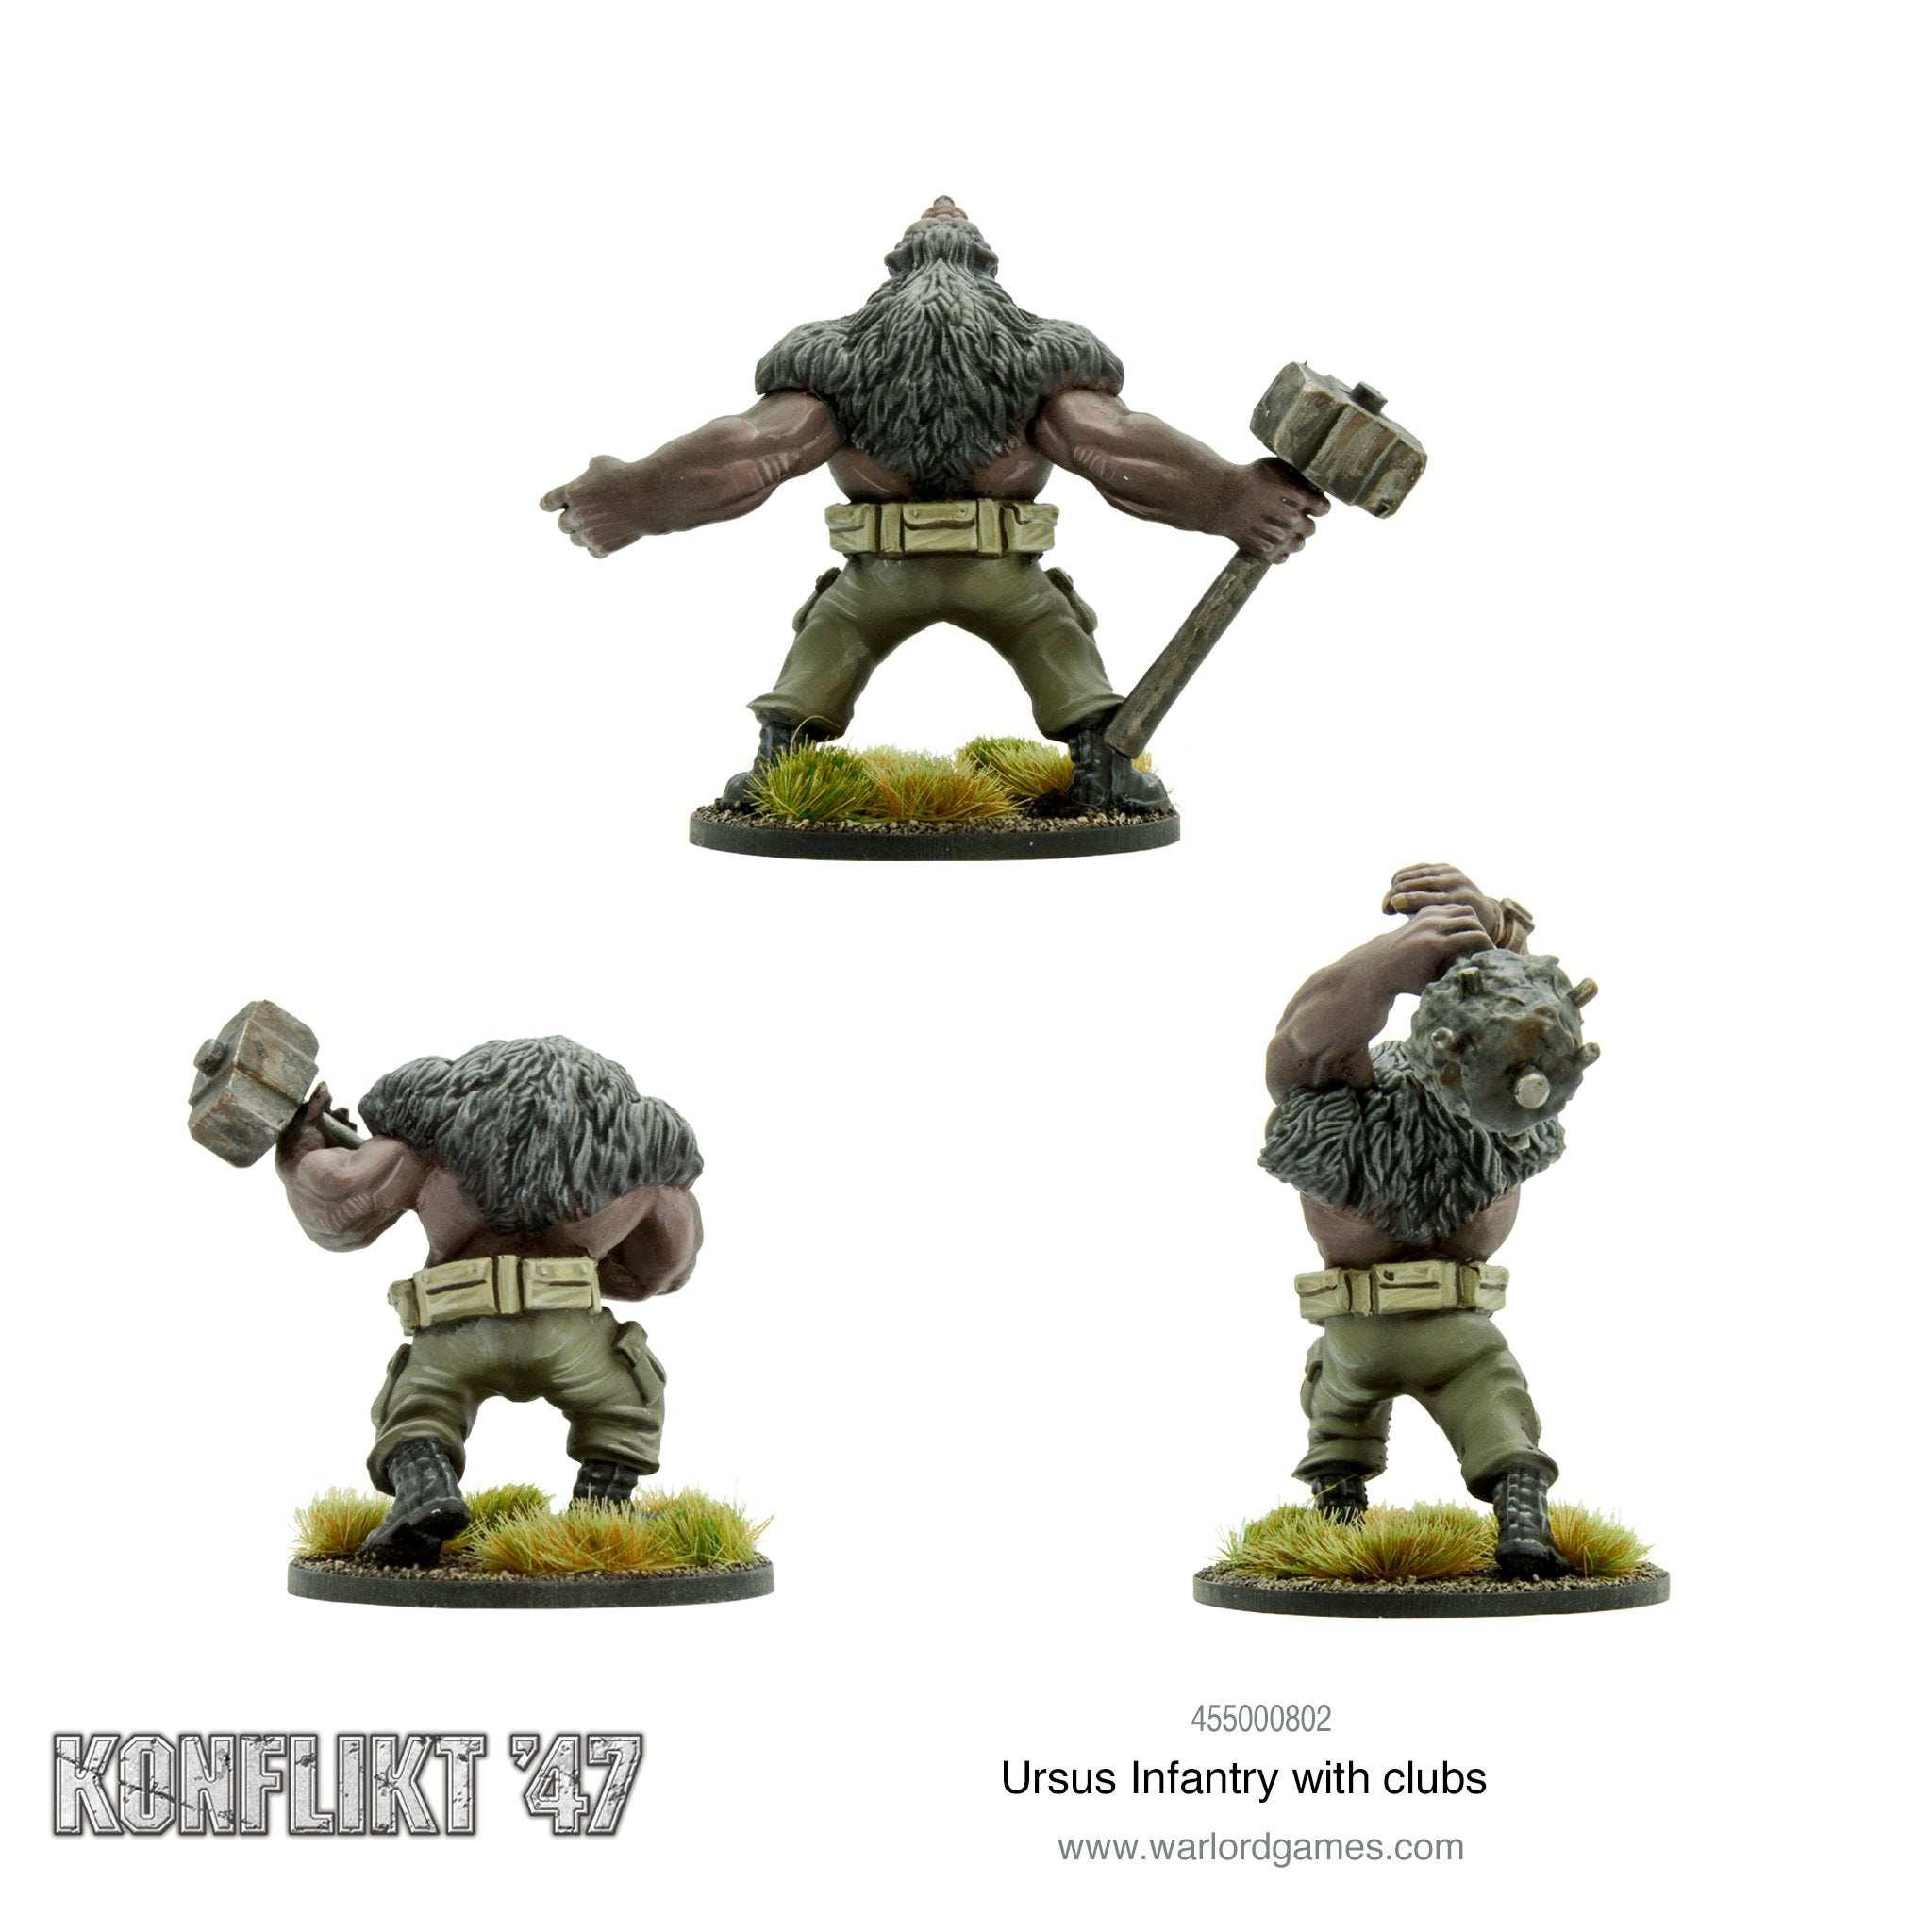 Ursus Infantry with clubs